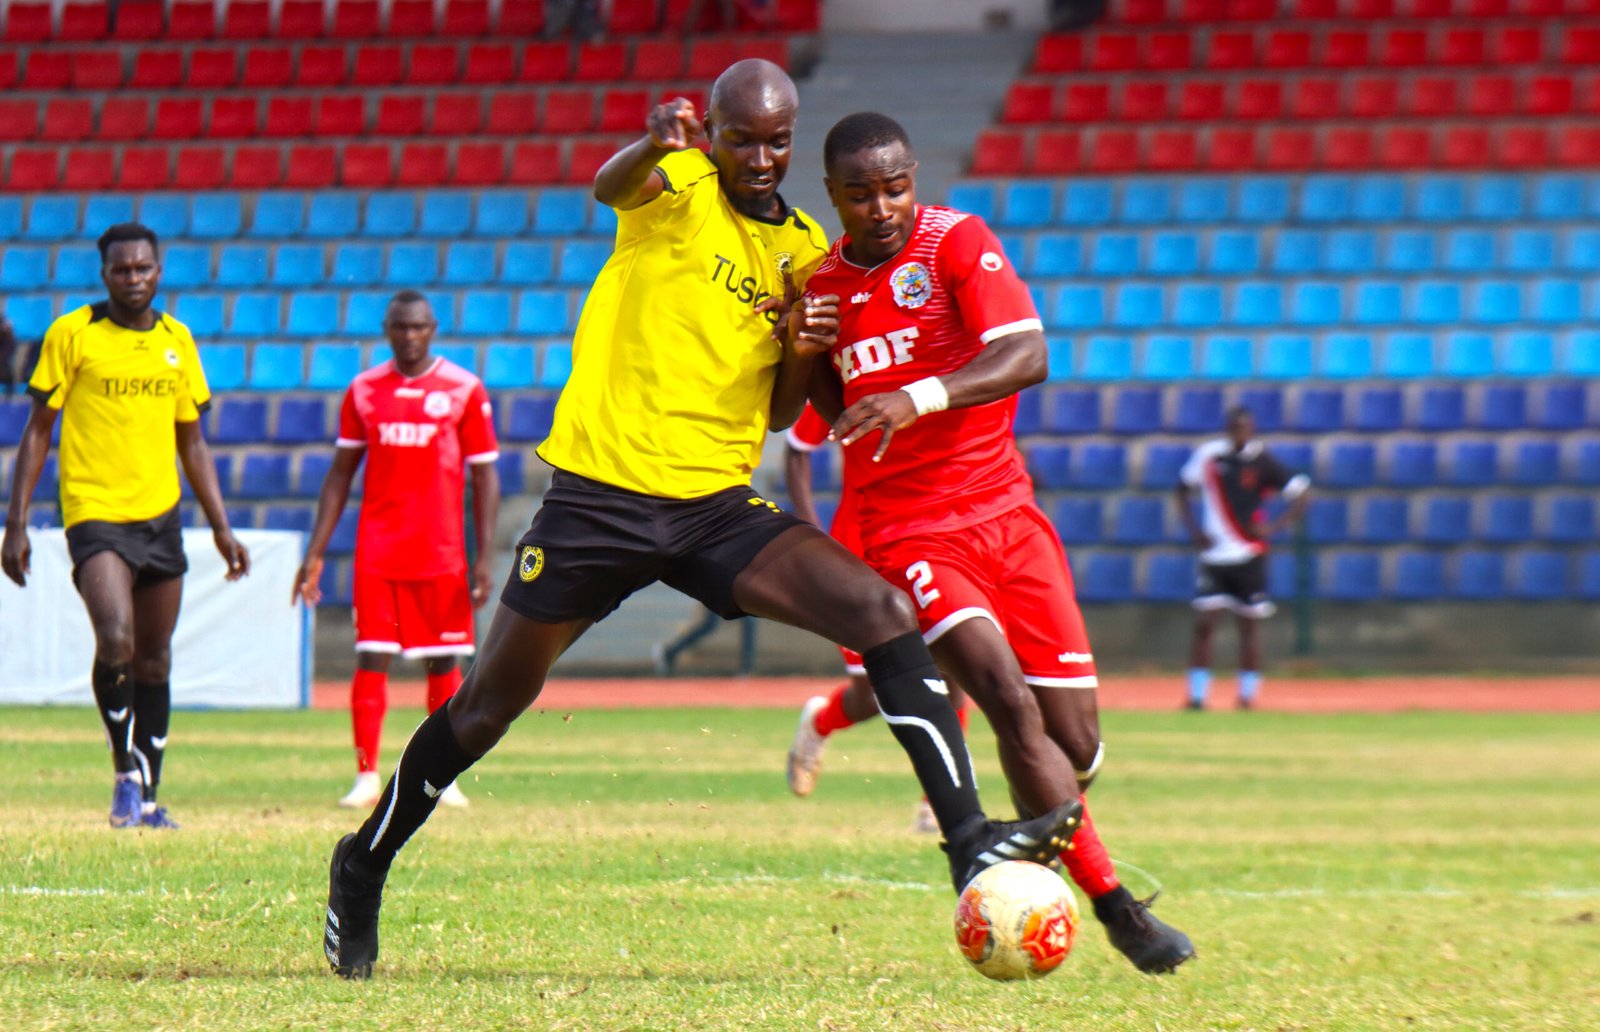 Humphrey Mieno of Tusker FC battles for the ball